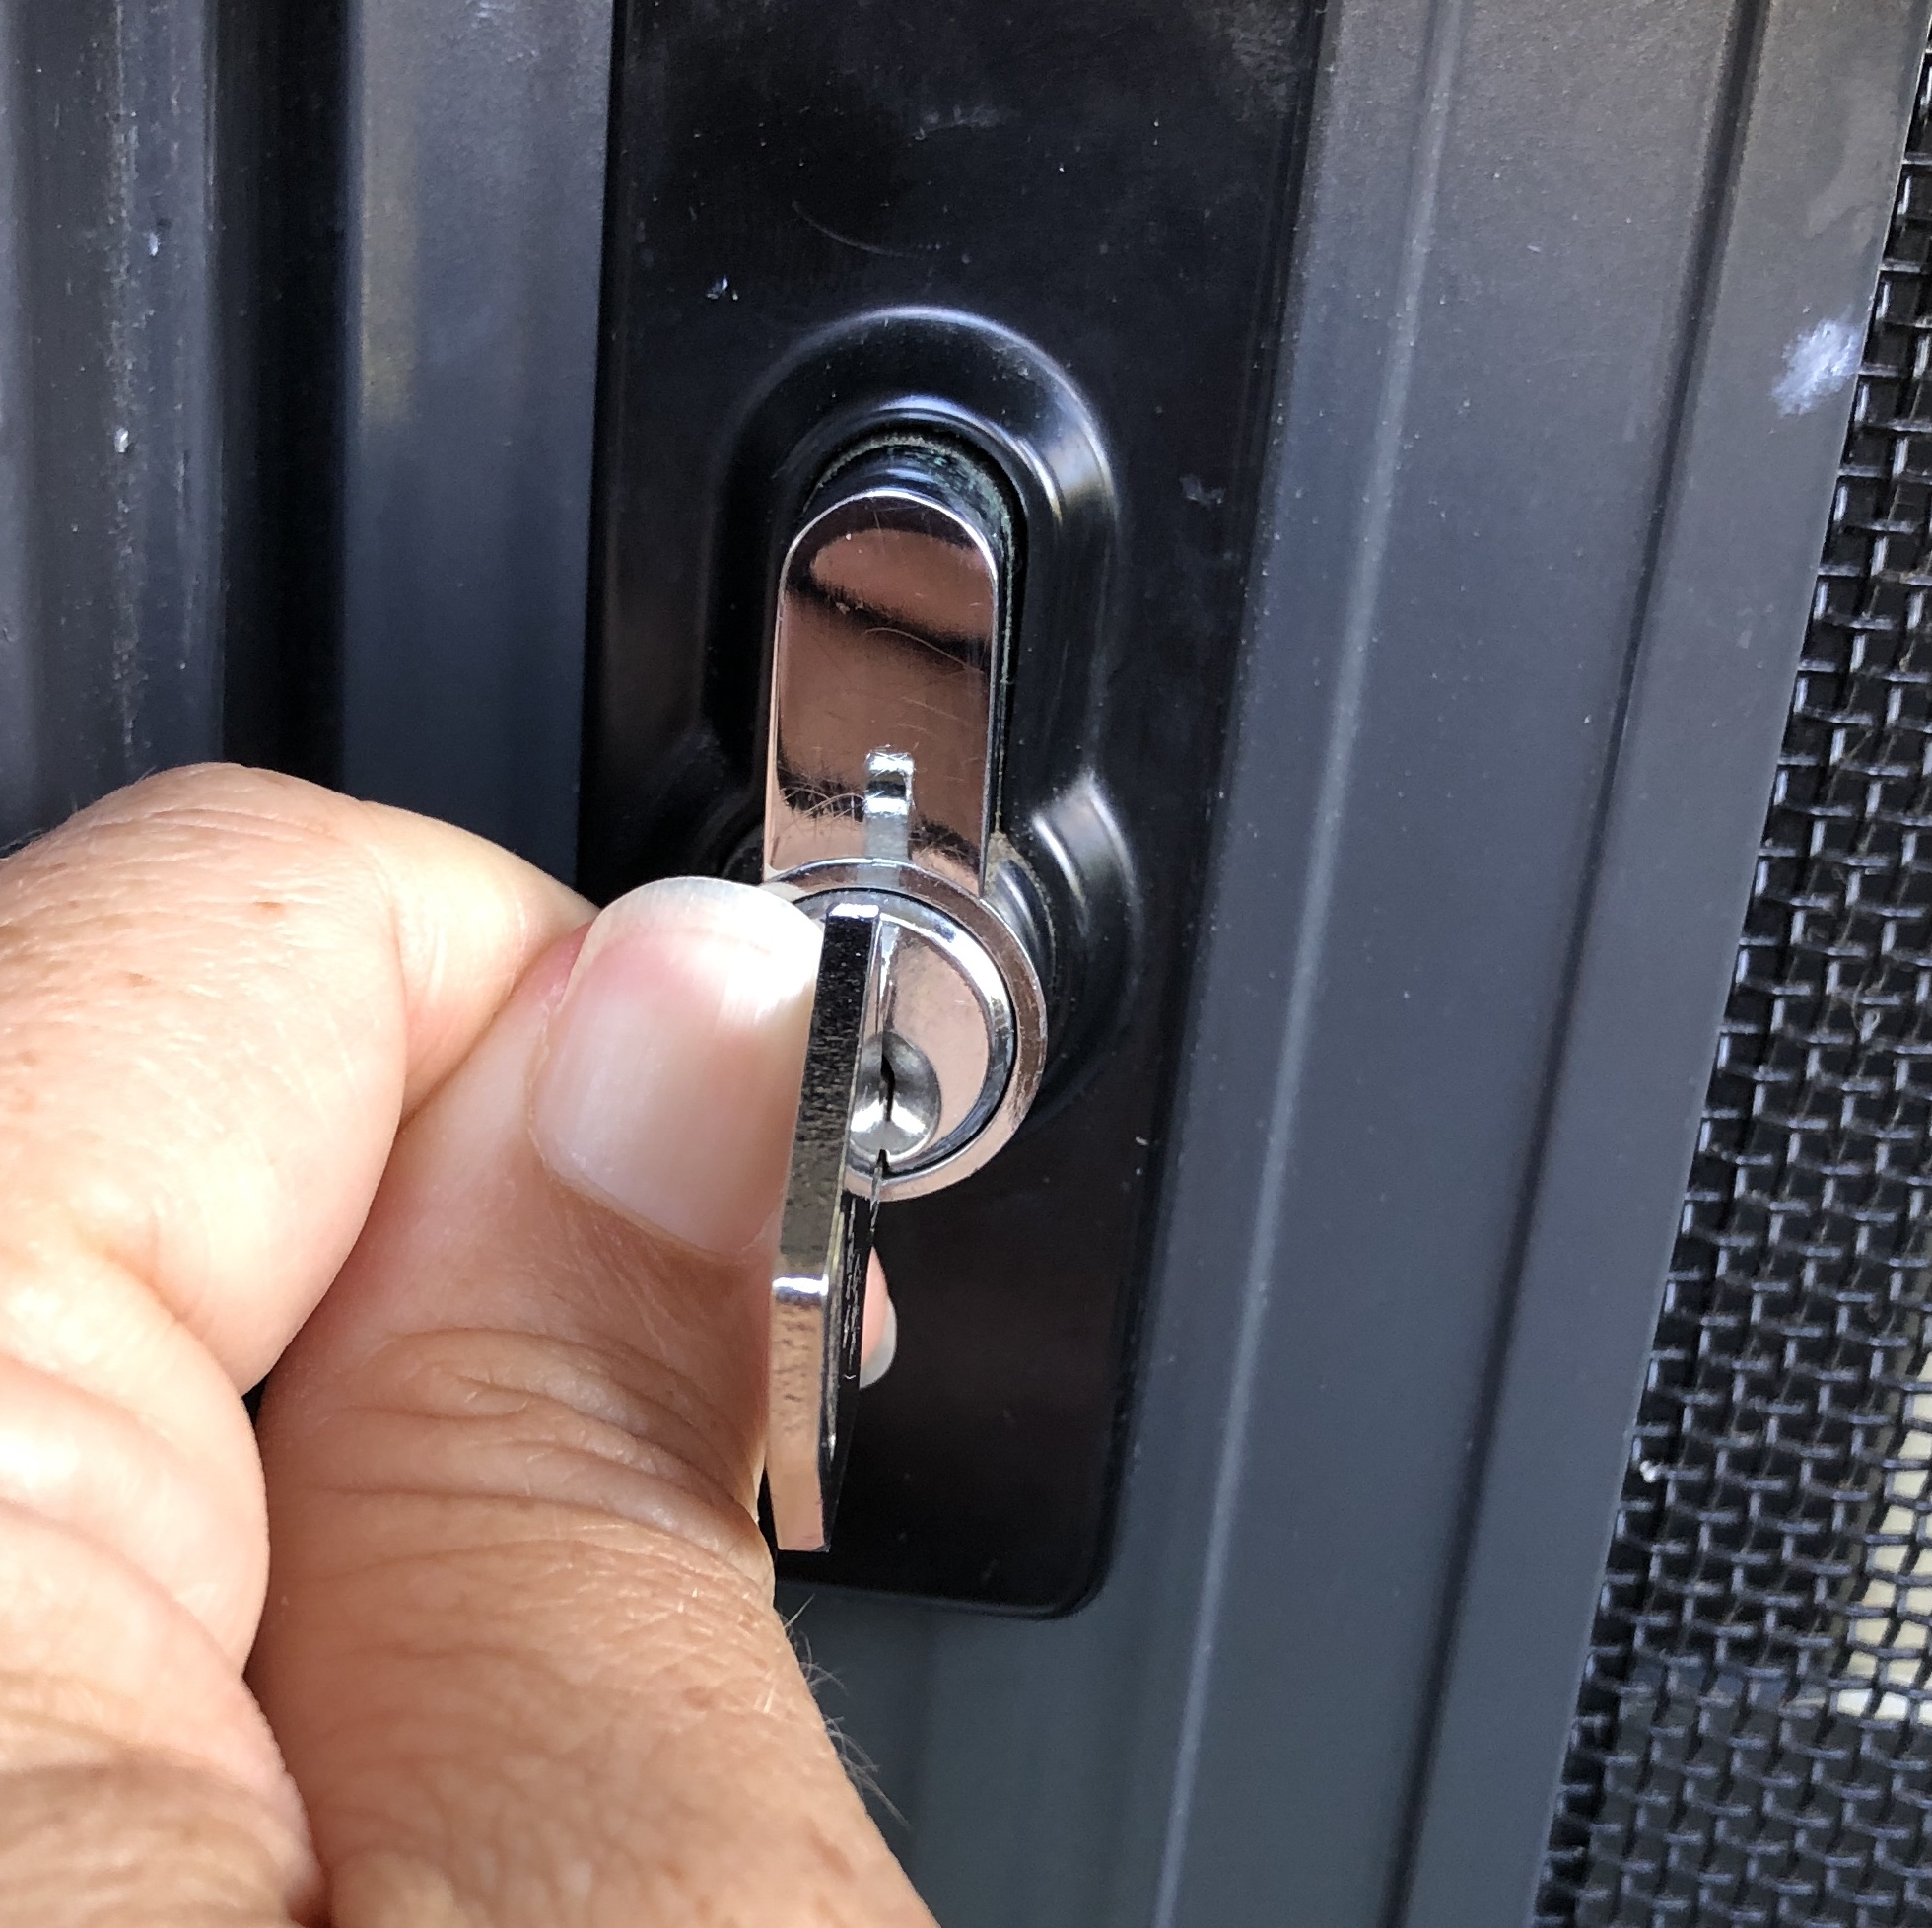 5 Things To Know About Fixing Frozen or Stuck Car Locks